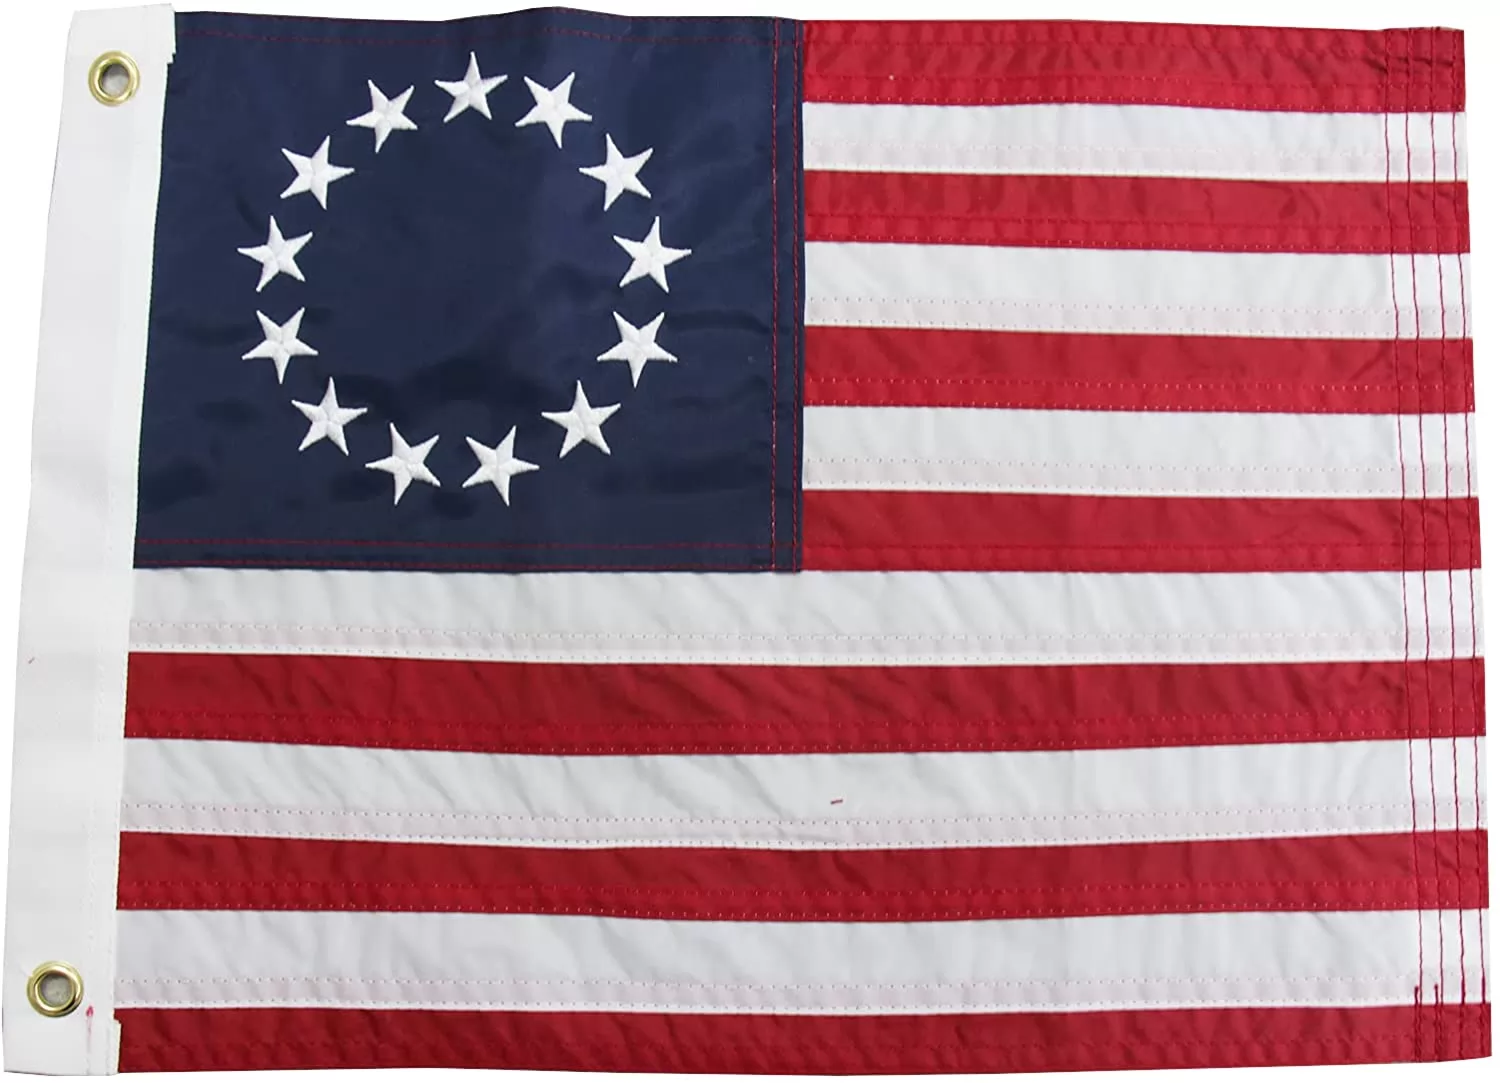 Homissor American Betsy Ross Boat Flag 12x18 Yacht Nautical Nylon Flags Outdoor- 13 Stars Colonies Primitive Embroidered Stars and Sewn Stripes